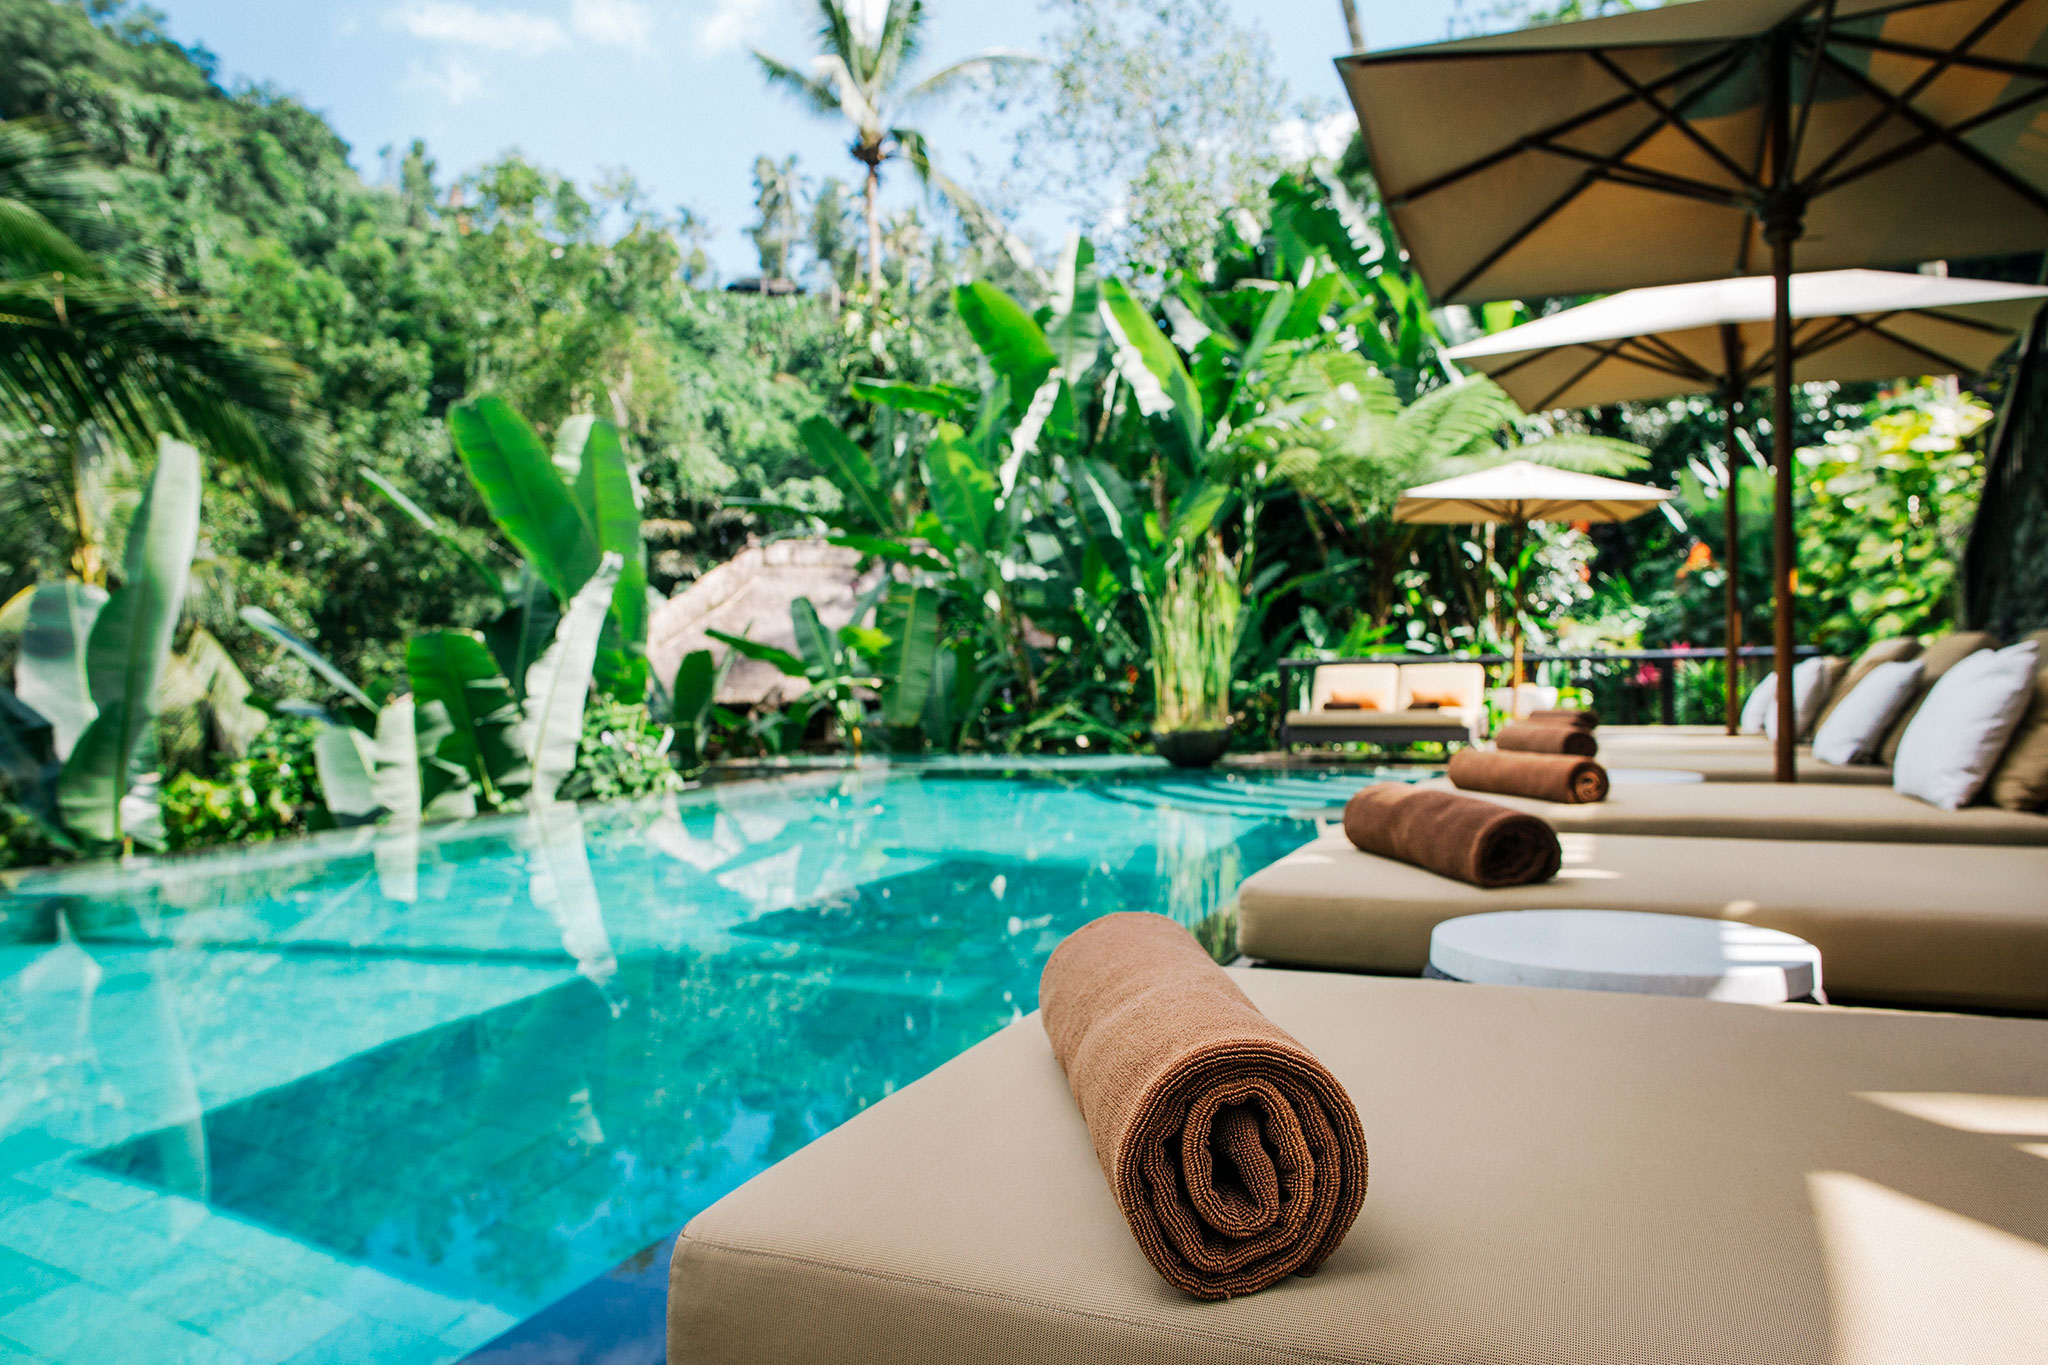 Fresh towels on chaise lounges wait for their guests by a tropical swimming pool.